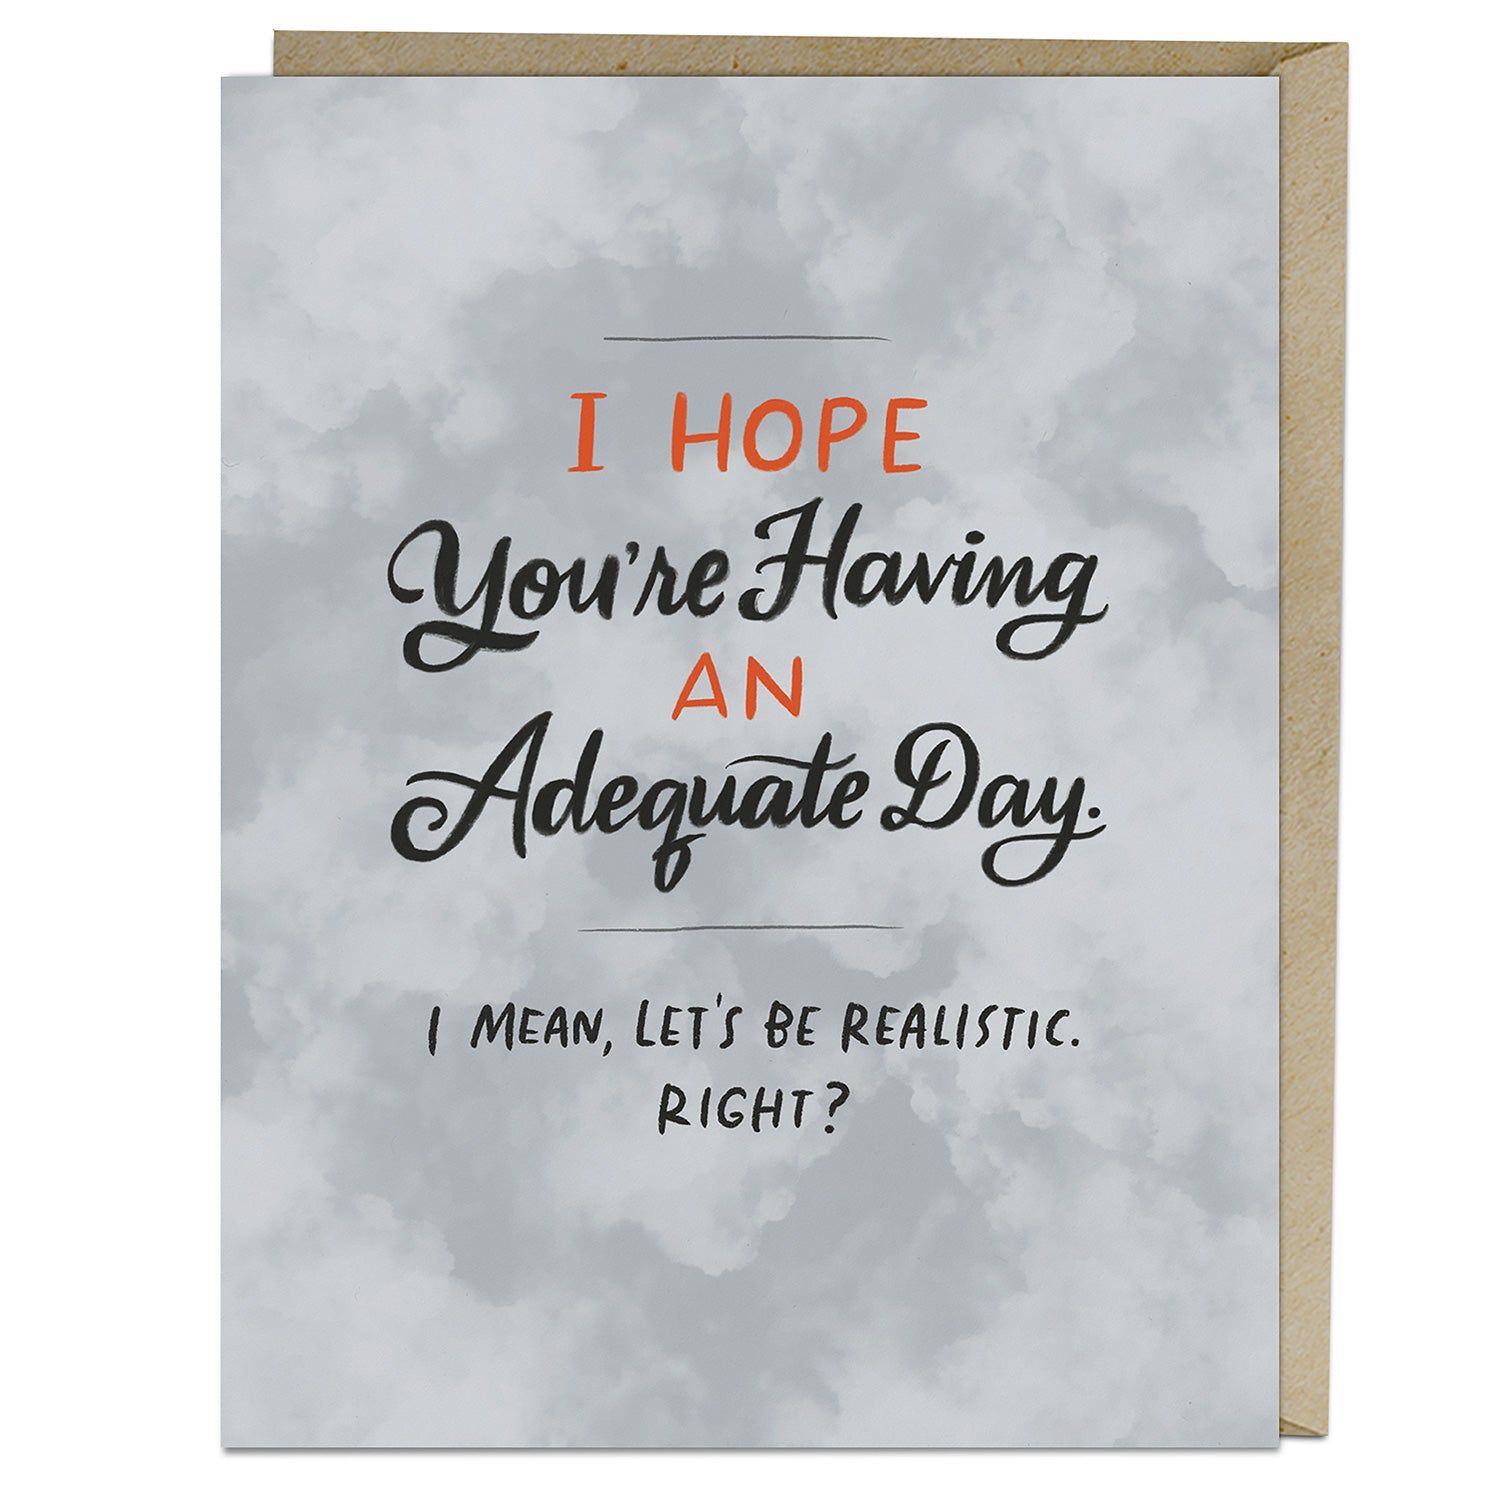 Adequate Day Card